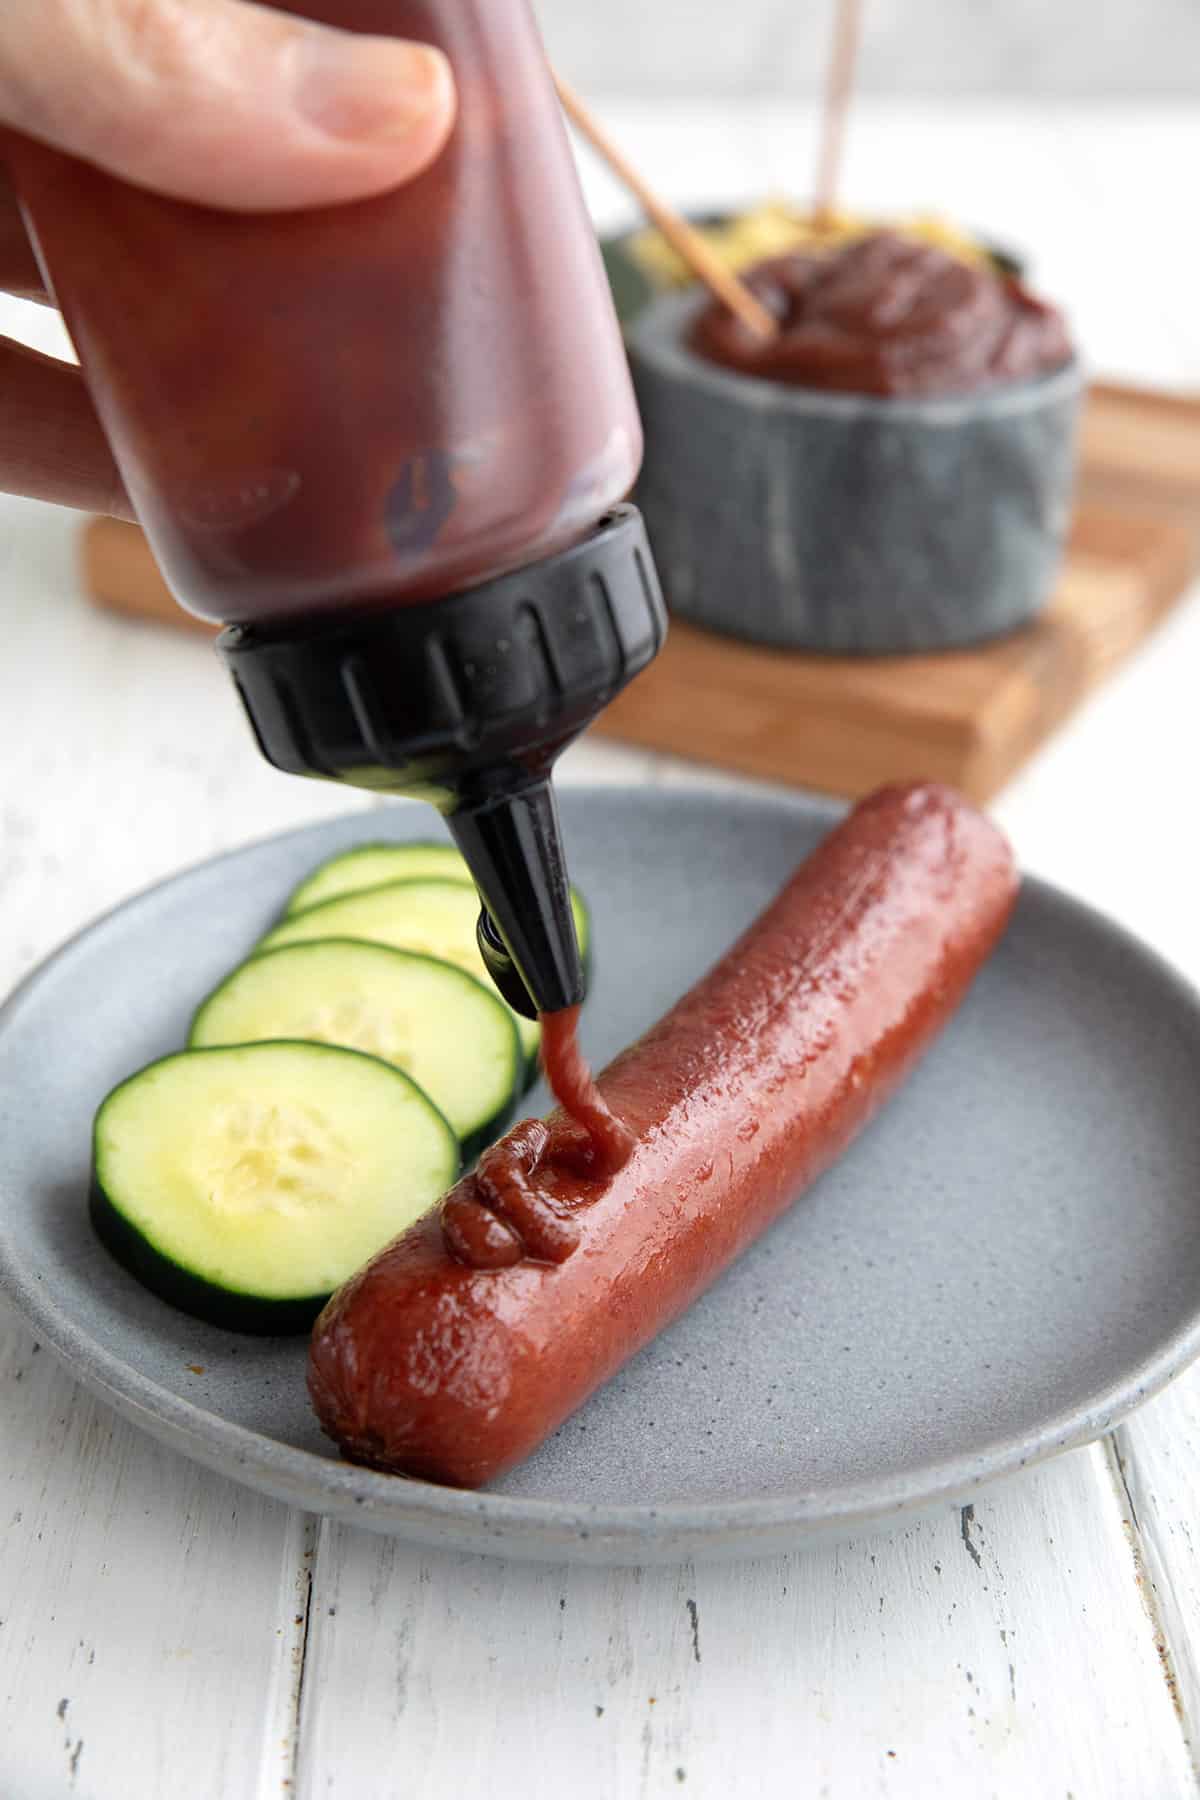 A squeeze bottle filled with sugar free ketchup being squeezed over a hot dog.